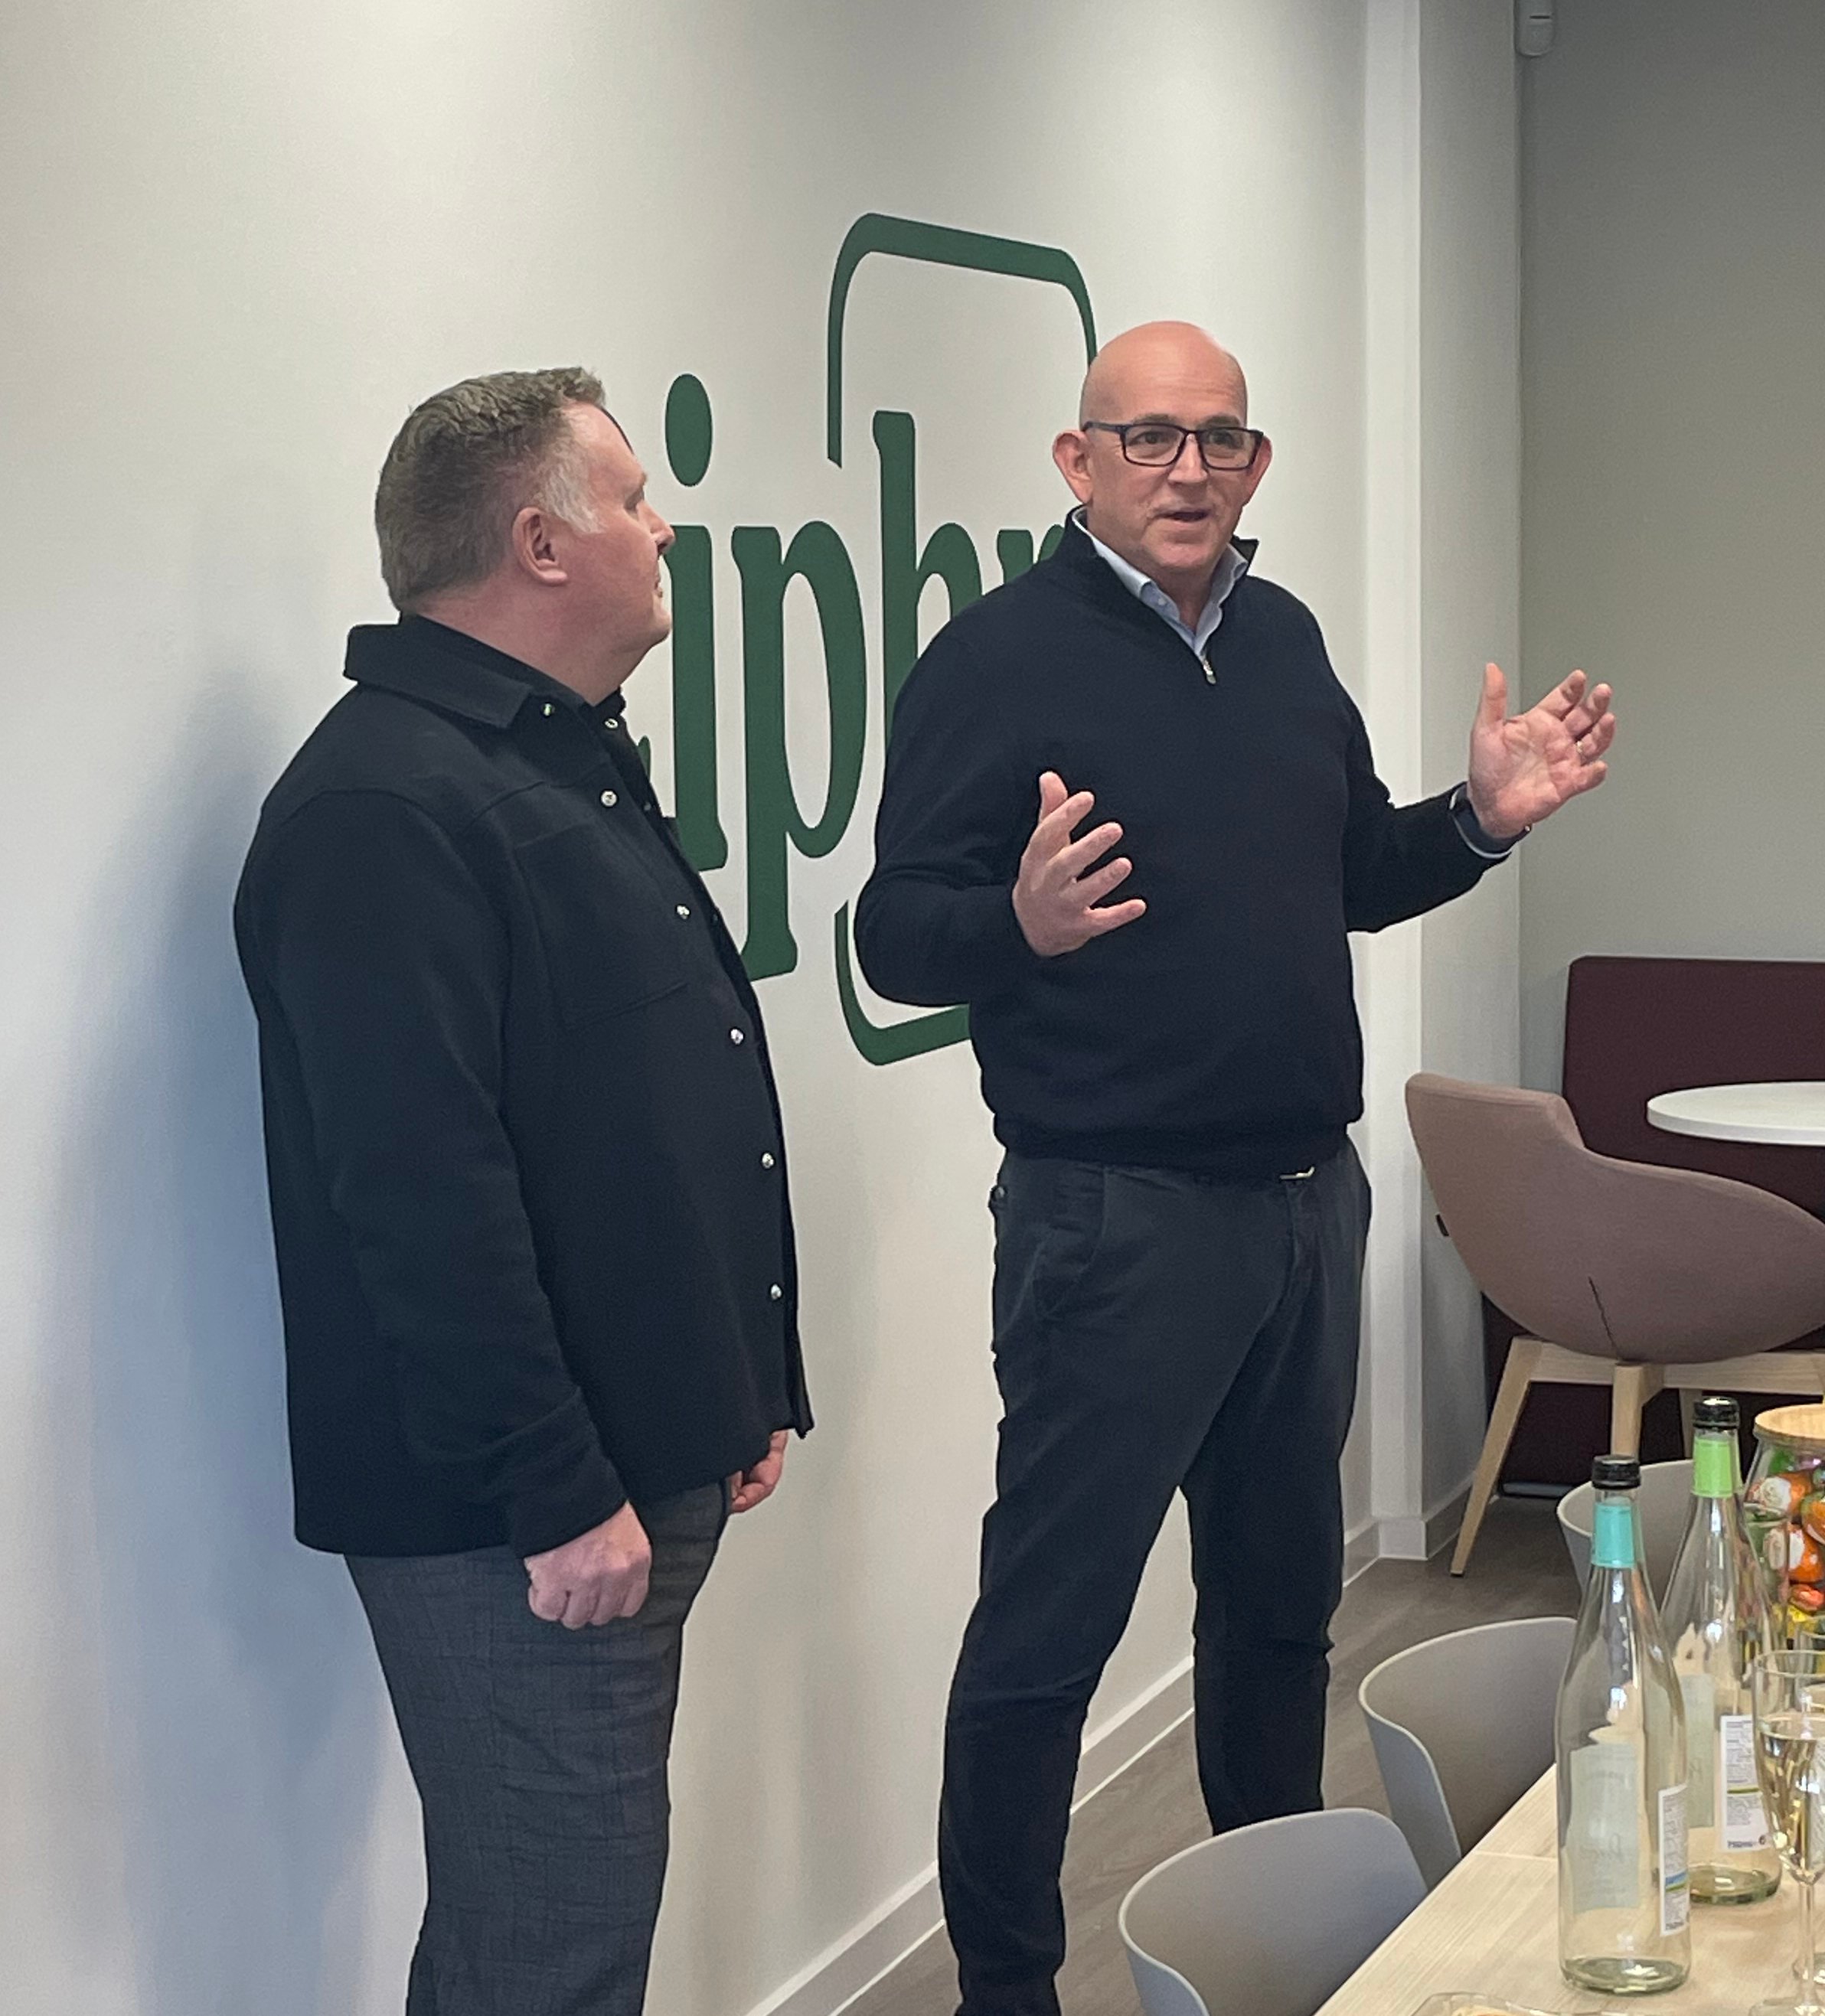 Jason Davenport, CEO of the Chartered Institute of Payroll Professionals, with Sion Lewis, CEO of Ciphr, at the official opening of Ciphr’s Reading office